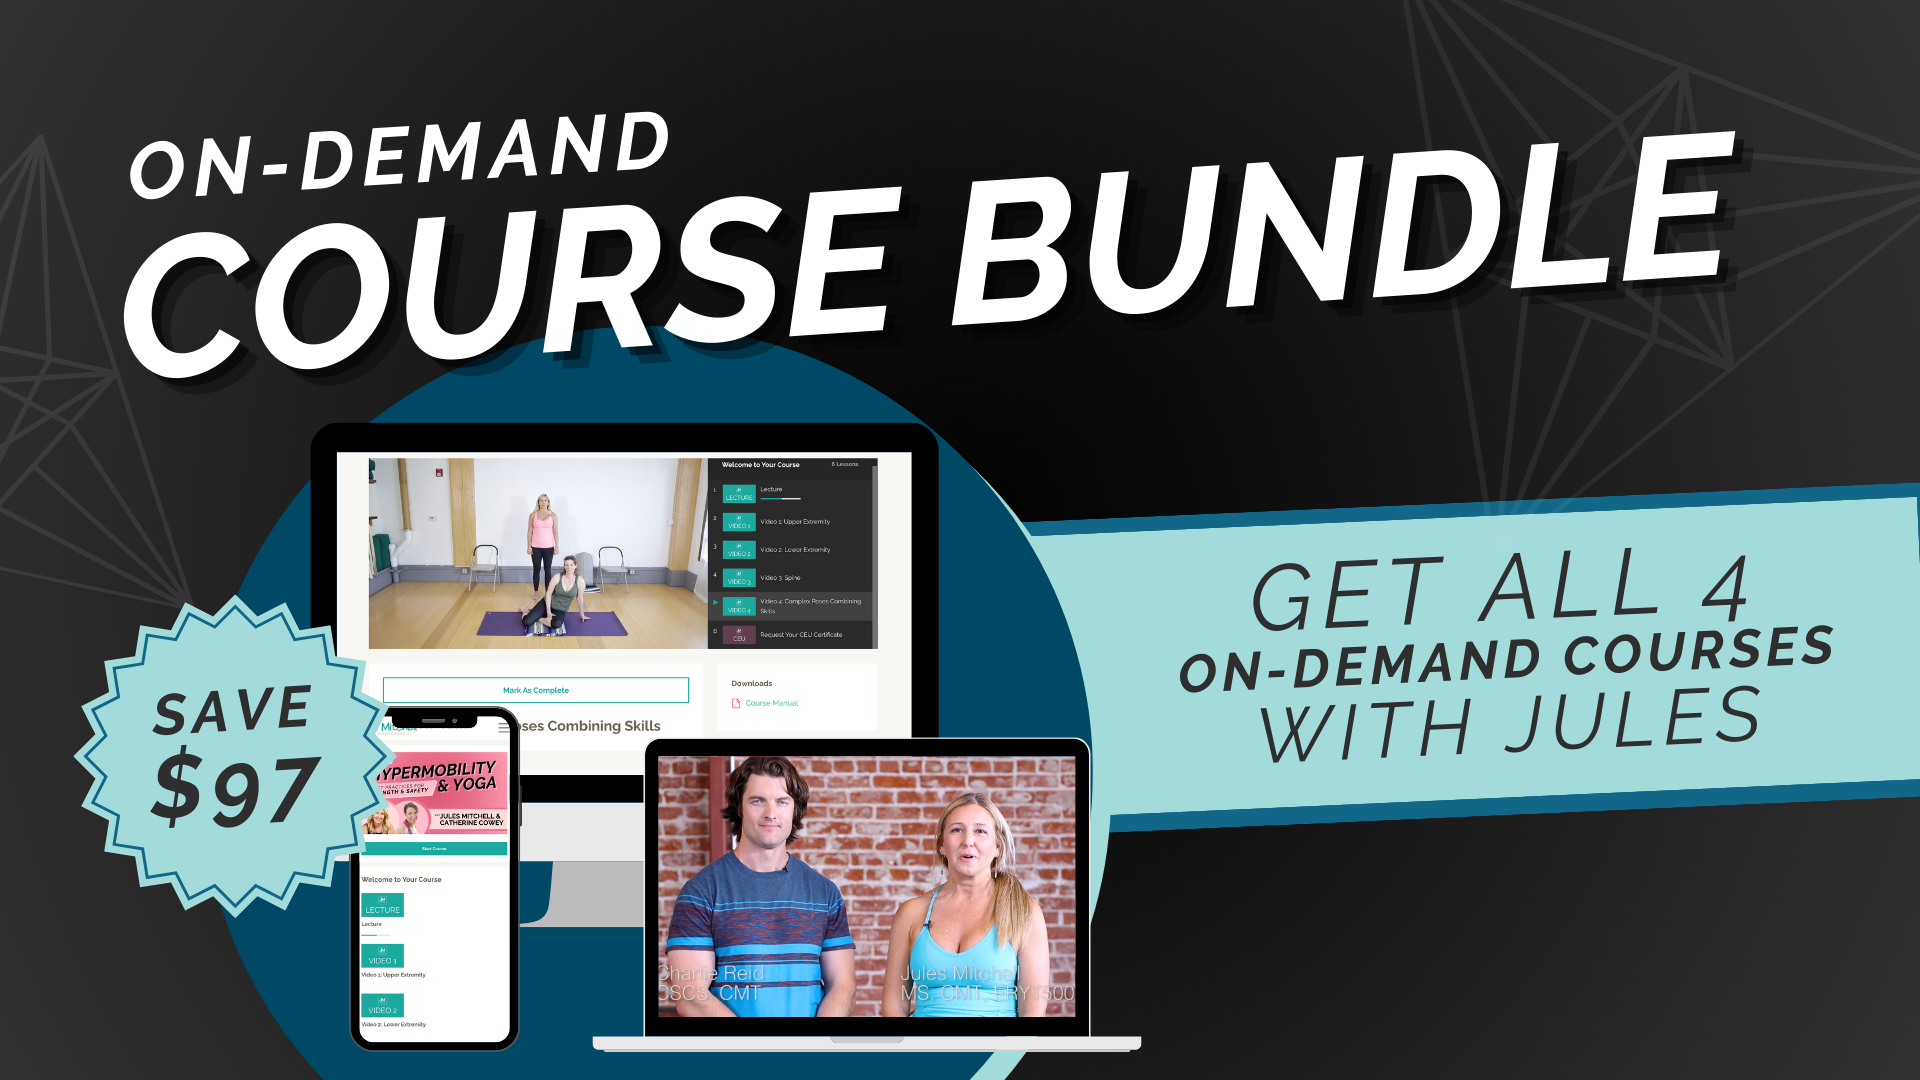 On-Demand Course Bundle - Get all 4 on-demand courses with Jules, save $97